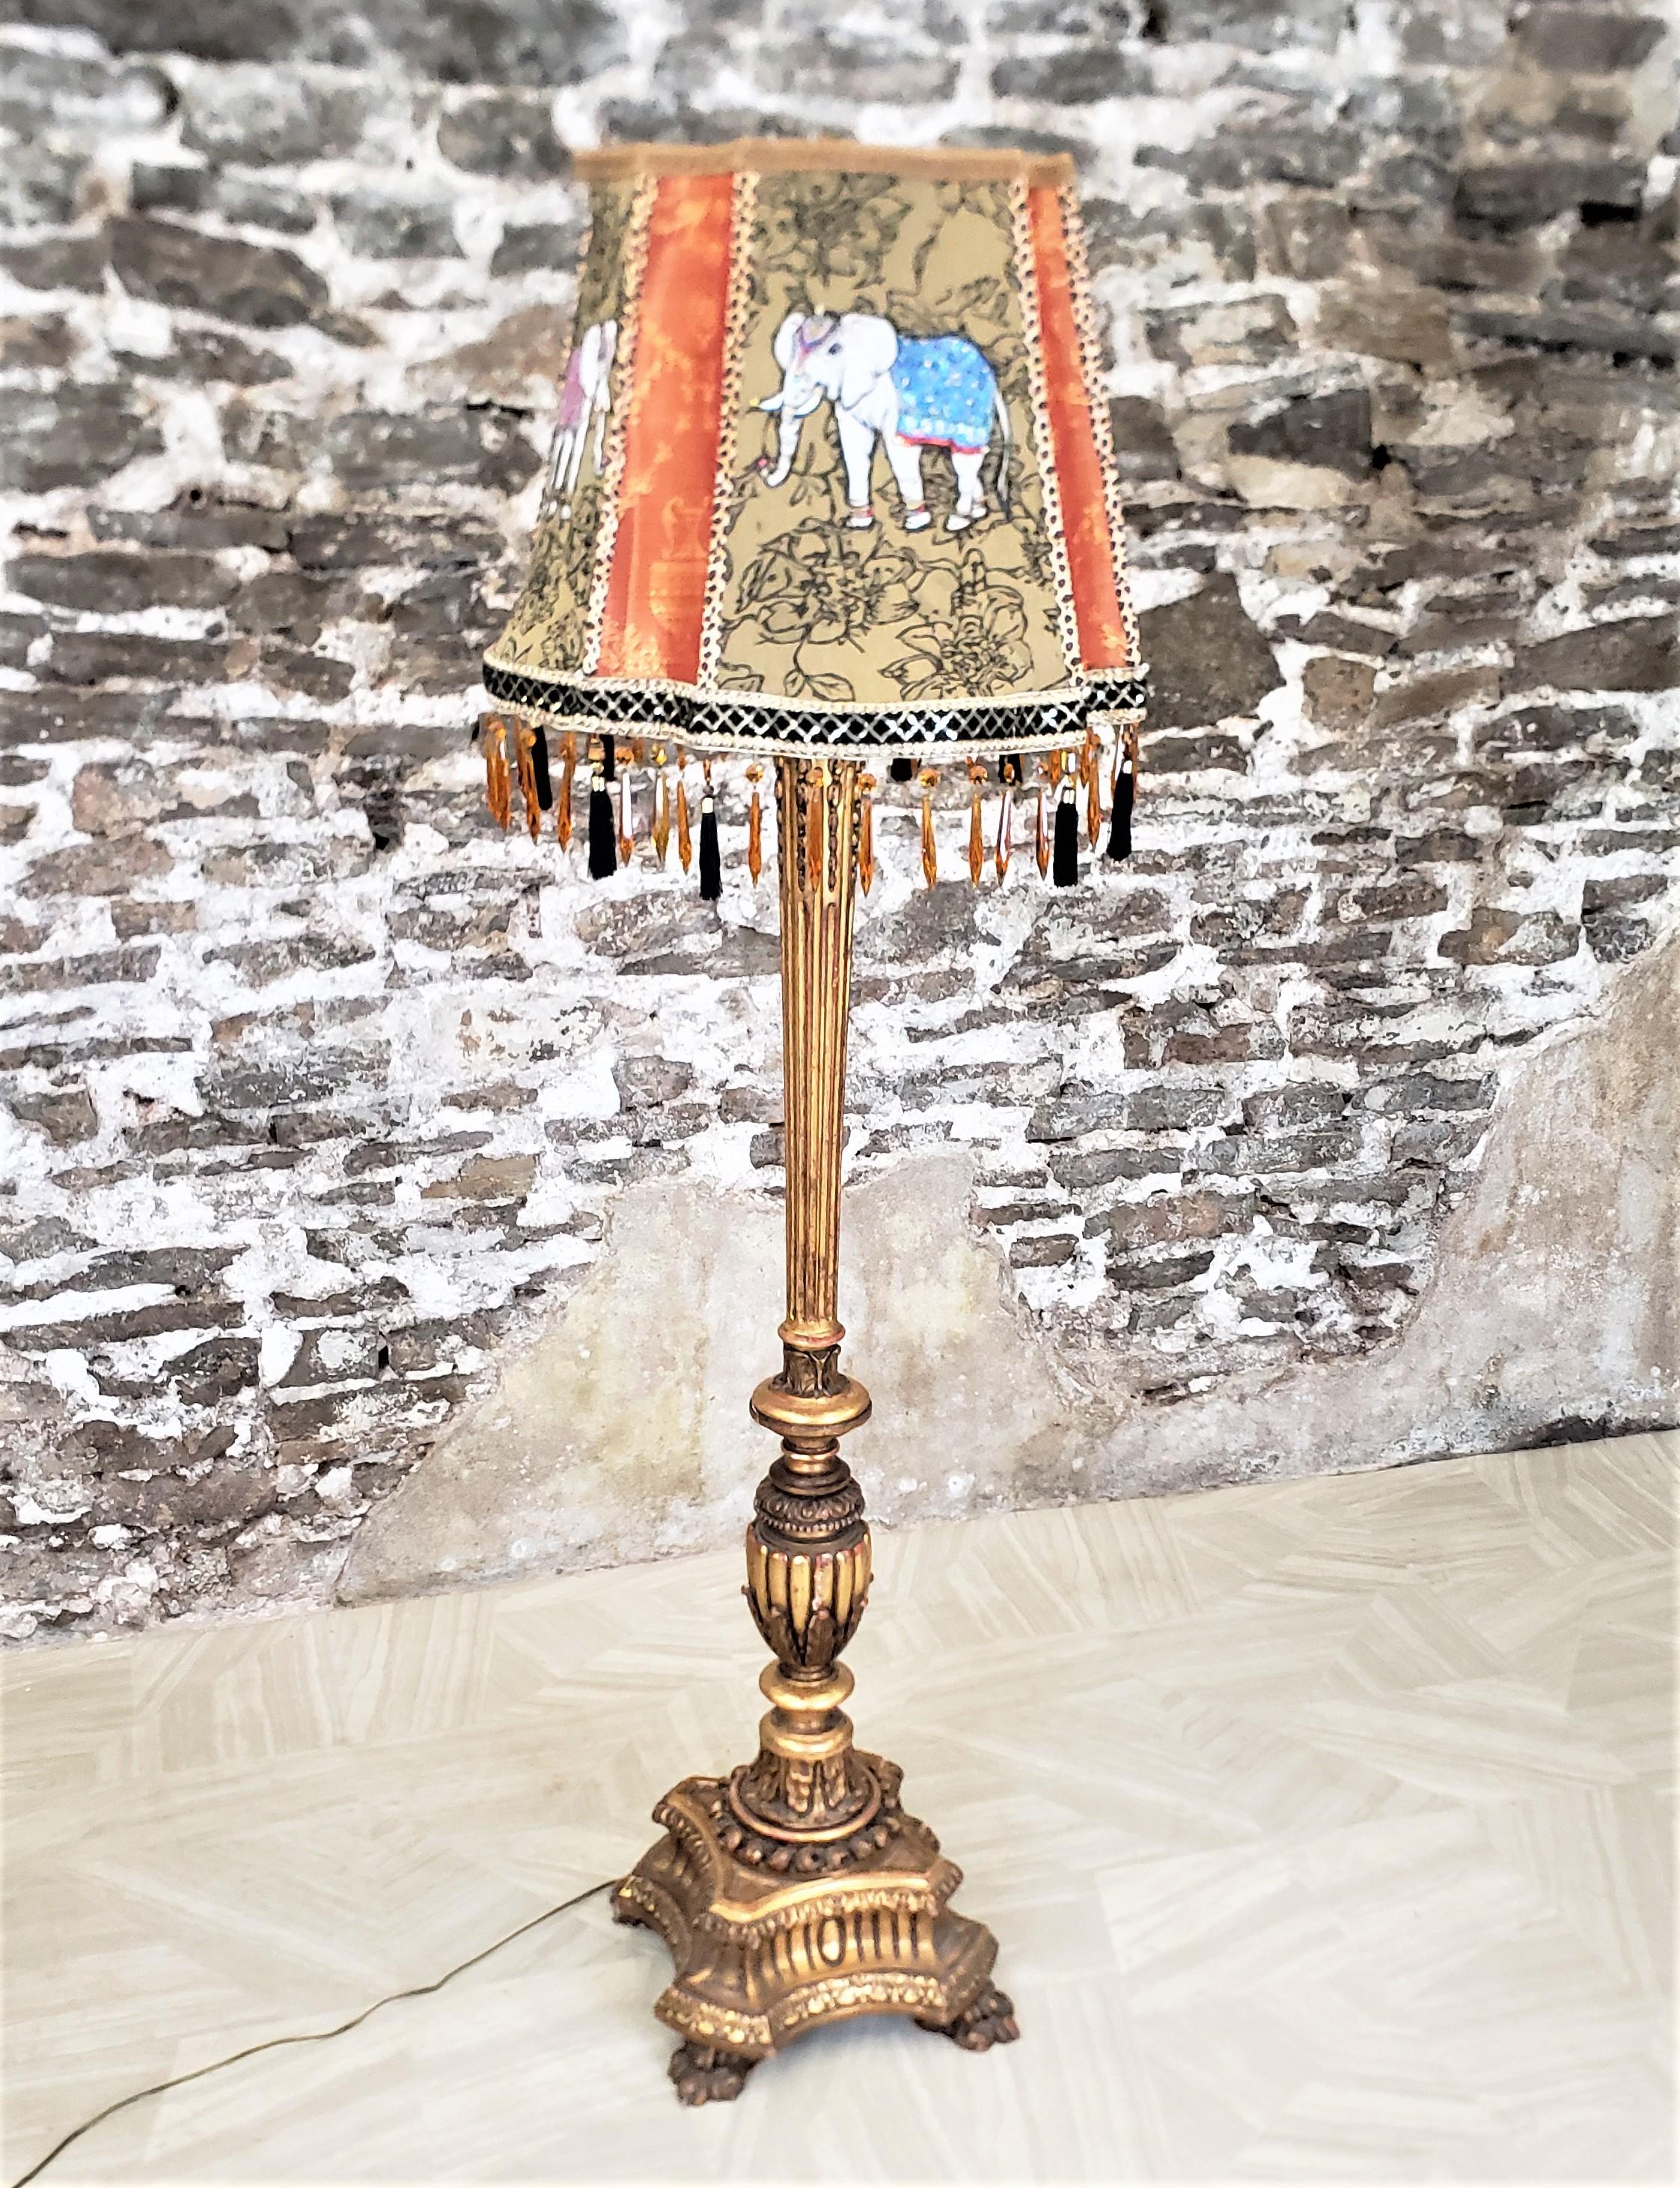 This antique florr lamp is unsigned, but presumed to originate from Italy and date to approximately 1920 and done in a Classical Florentine style. The lamp base is composed of a softwood that have been heavily hand-carved with considerable